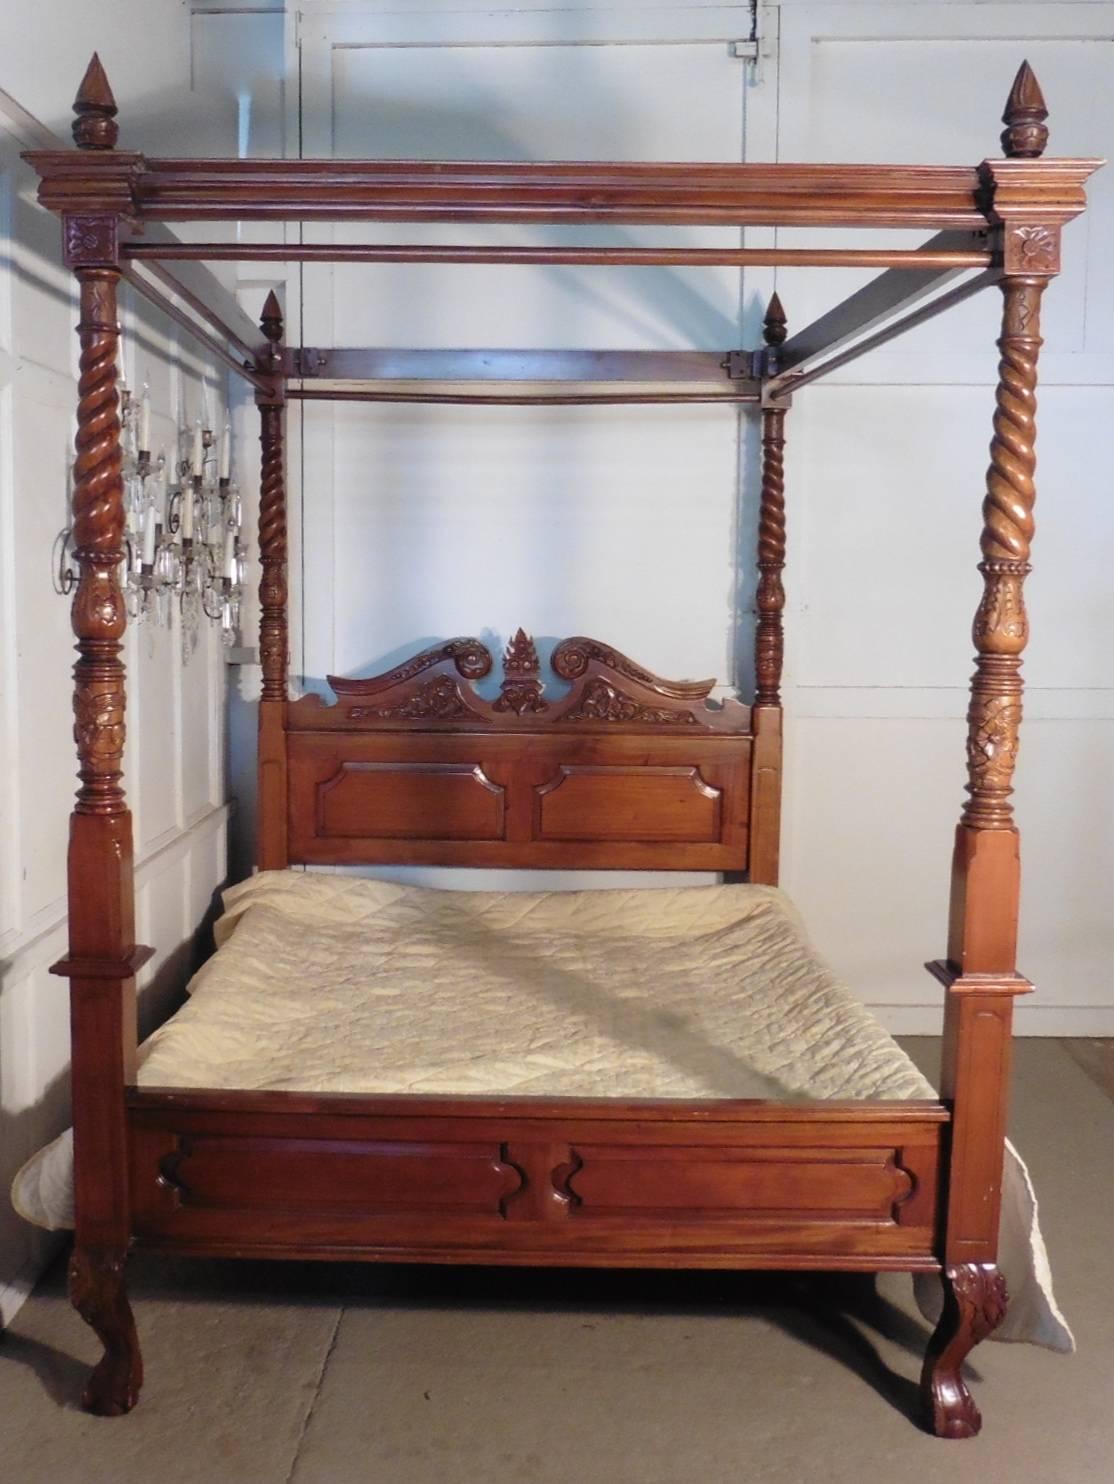 A large mahogany 5ft four-poster bed 

This a wonderful large Victorian style mahogany four poster bed, the bed posts are turned in mahogany, they have acanthus leaf carvings with an elegant twist at the top, the polished mahogany head board has a